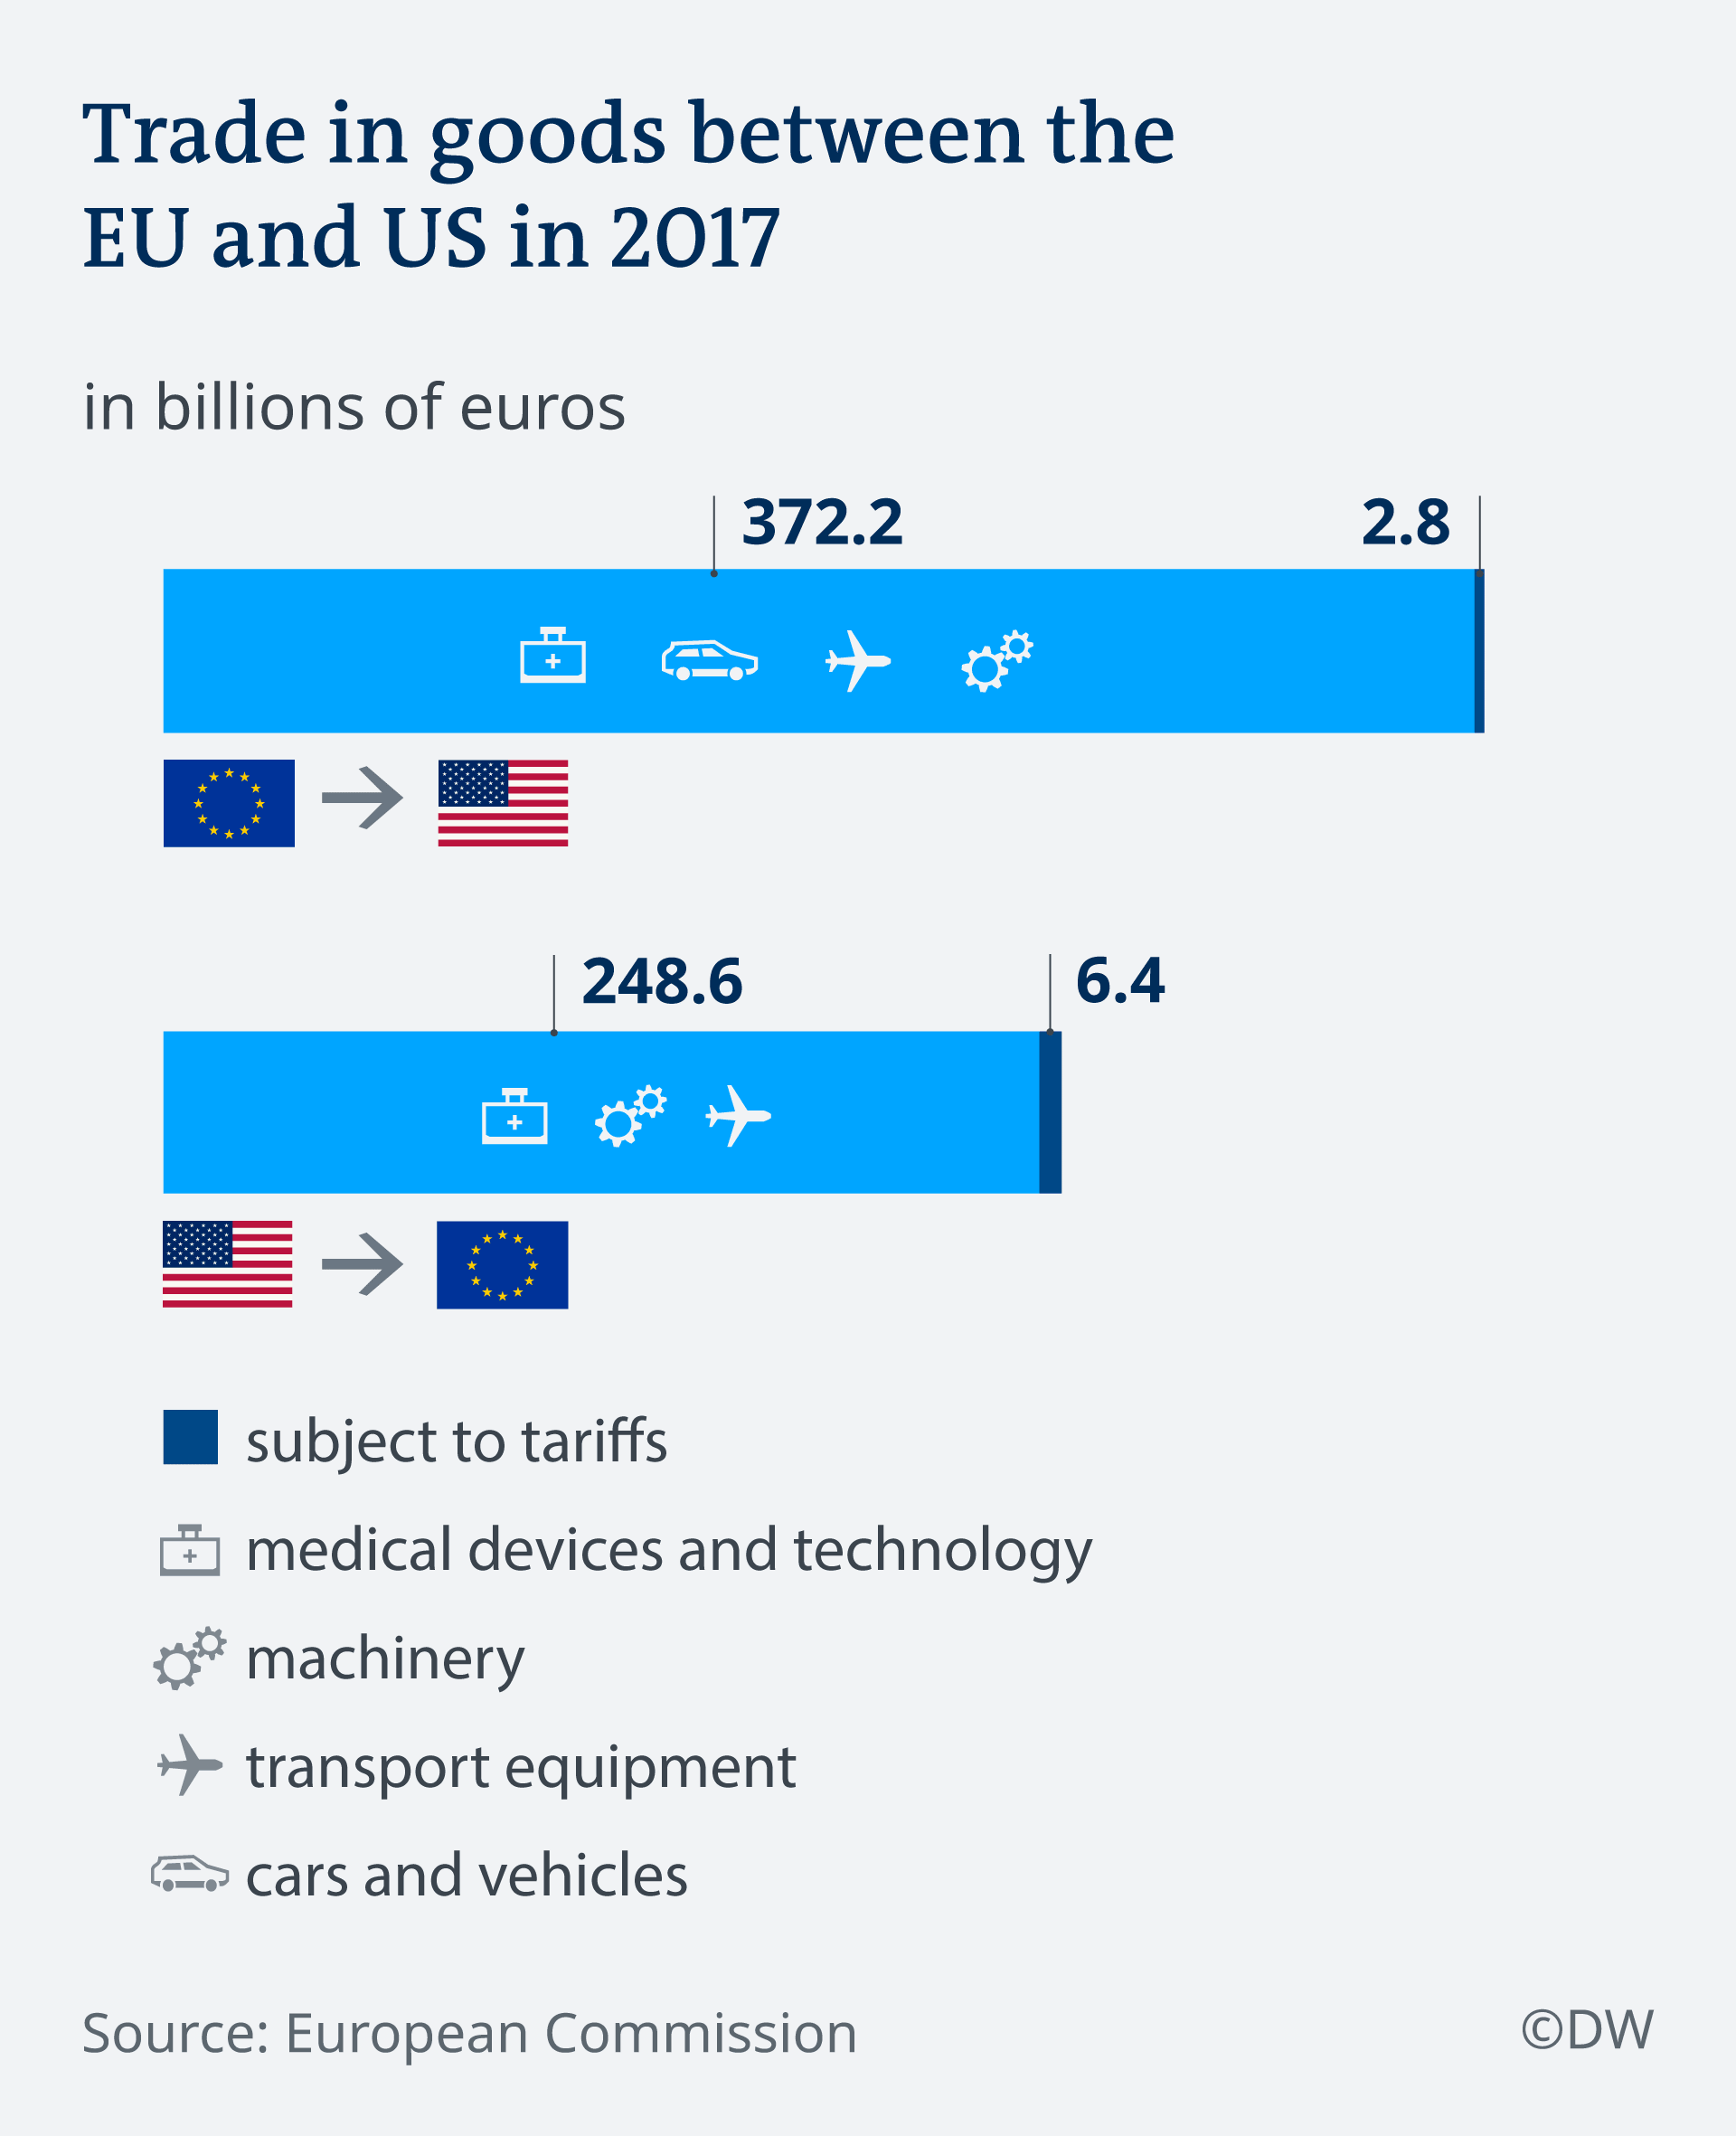 Trade goods between EU and US in 2017 Infographic